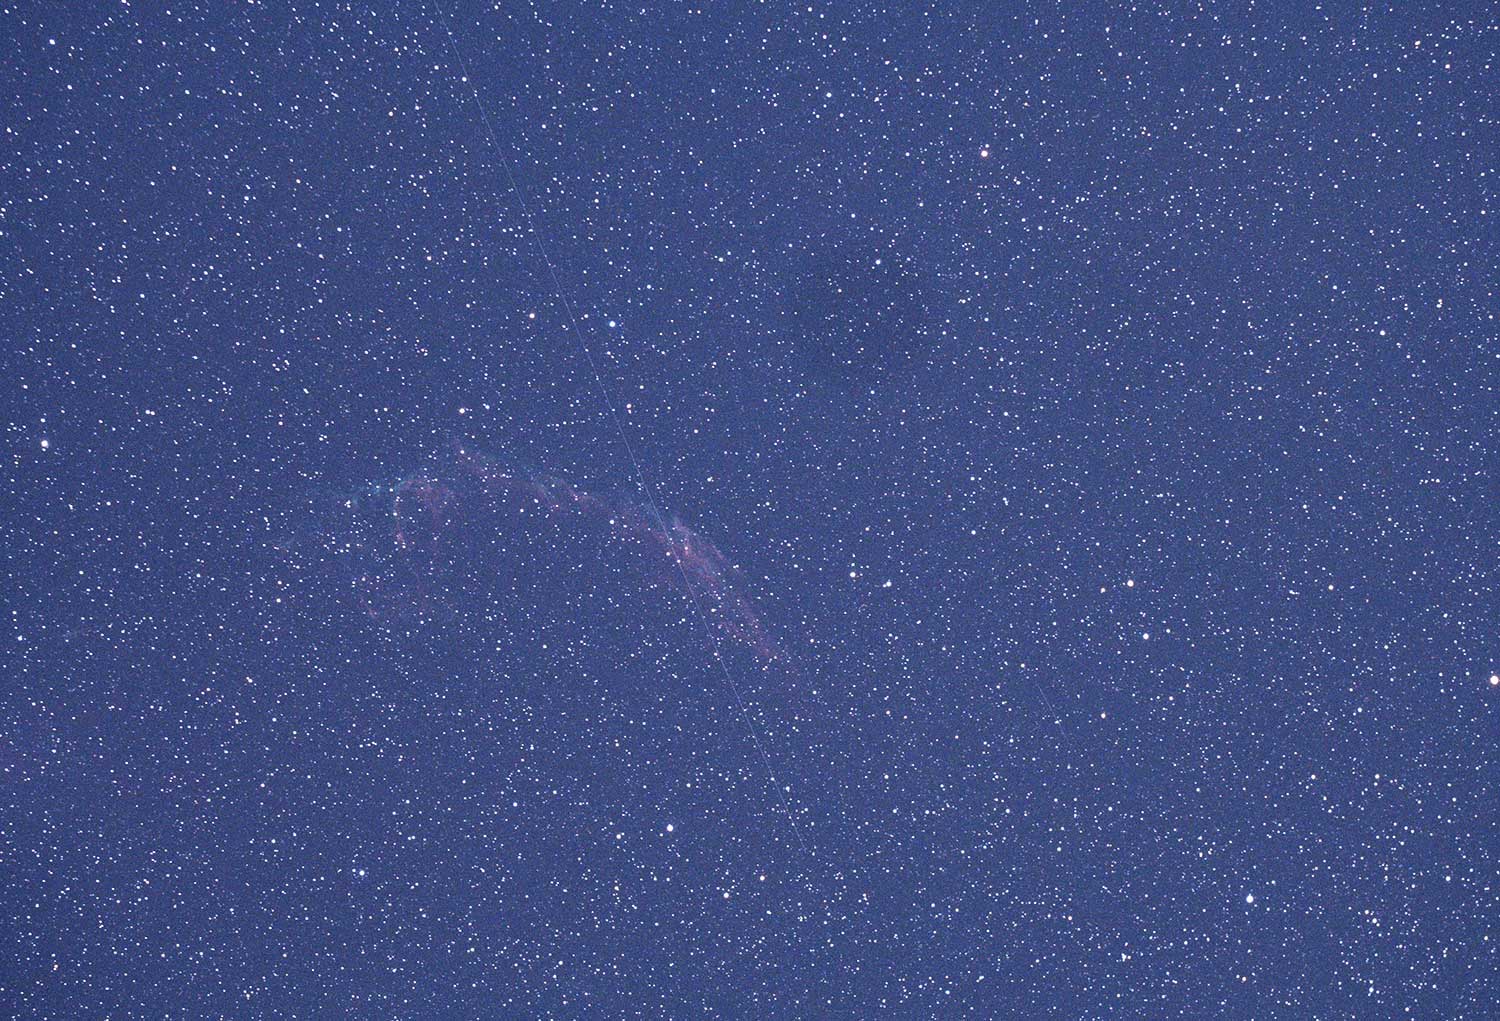 single 60 second exposure of Veil nebula after debayer with ASI 294 colour camera